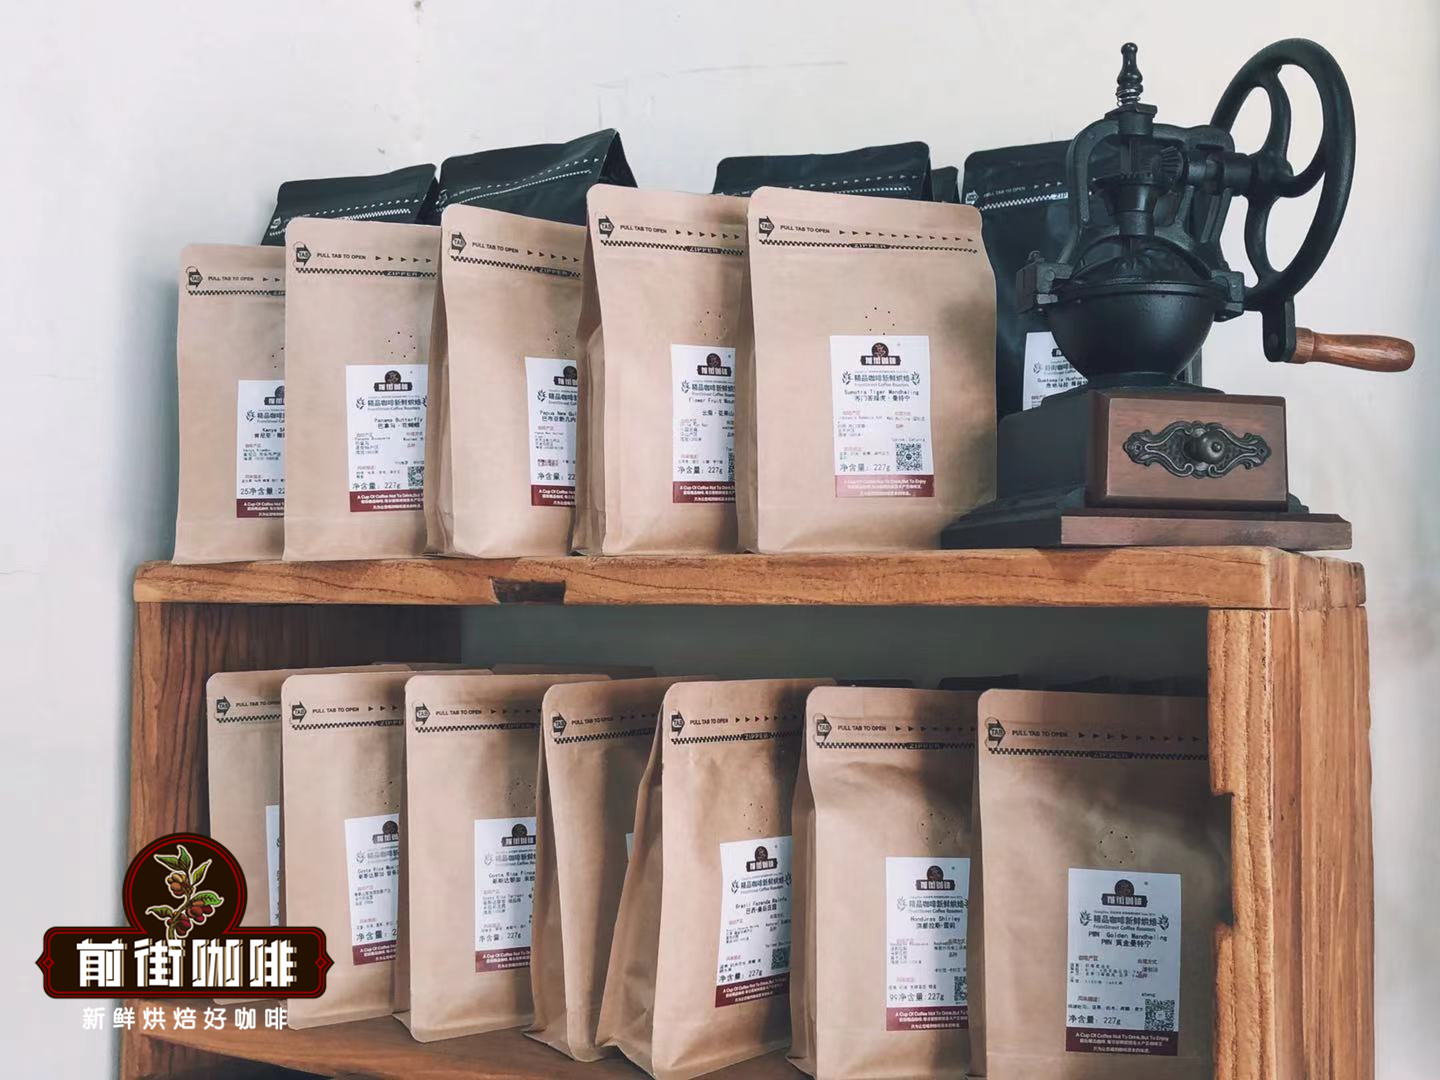 How to drink Yejiaxuefei Coffee beans adjust the ratio of extraction powder to water